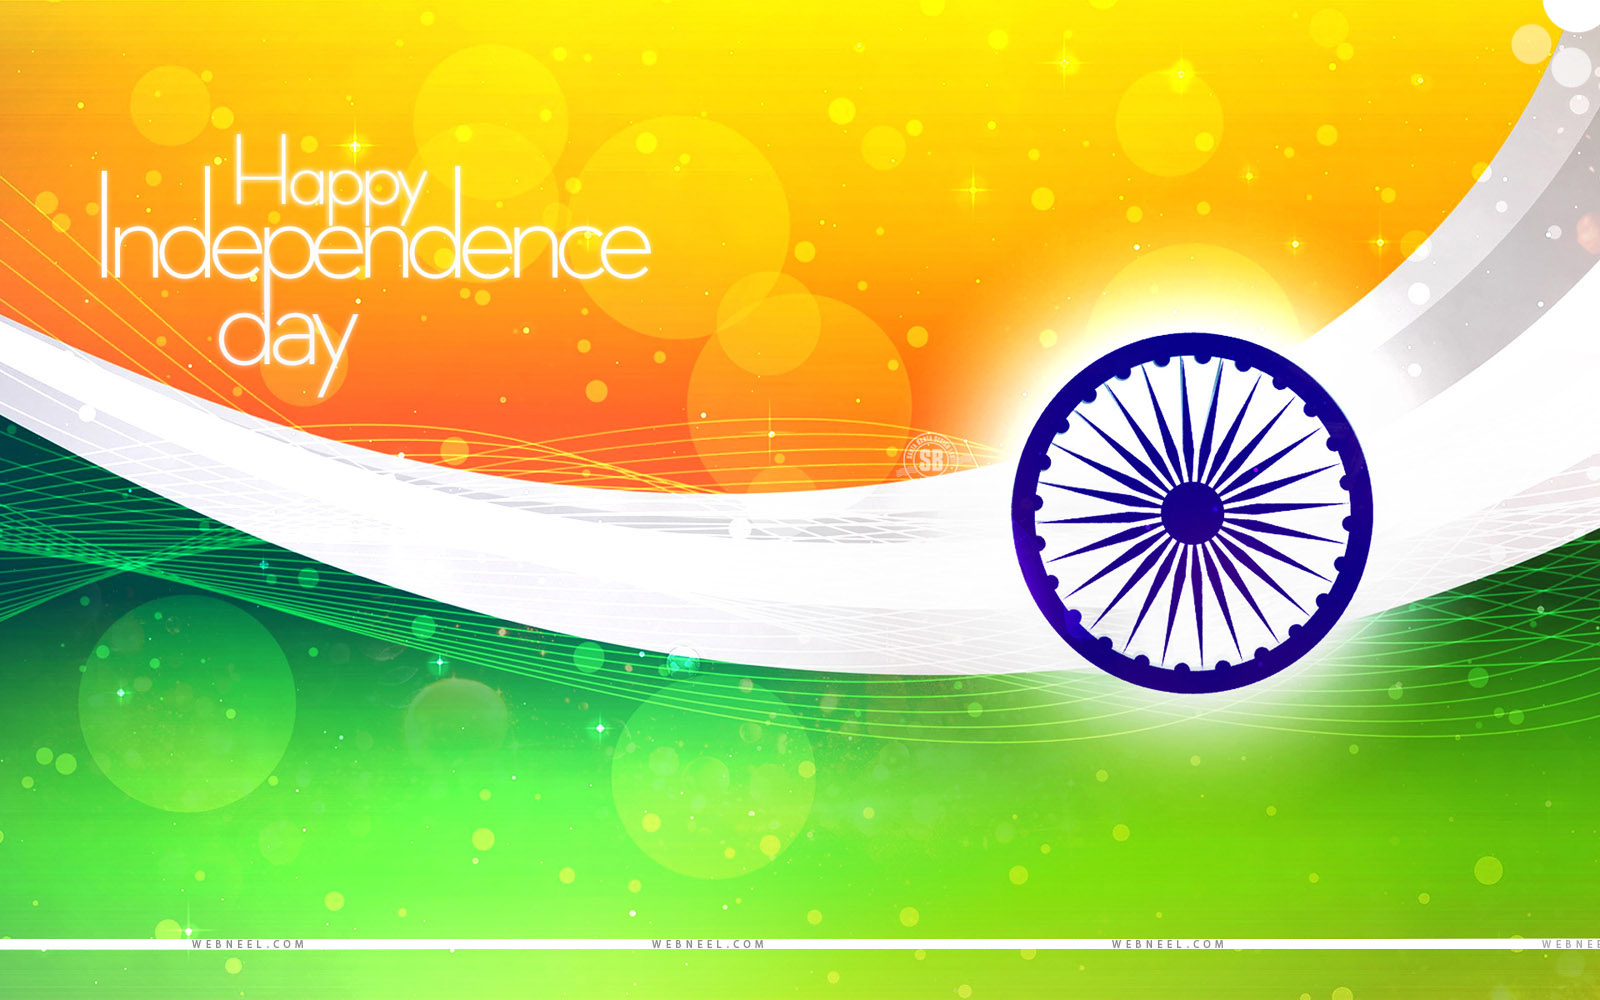 1-india-independence-day- 